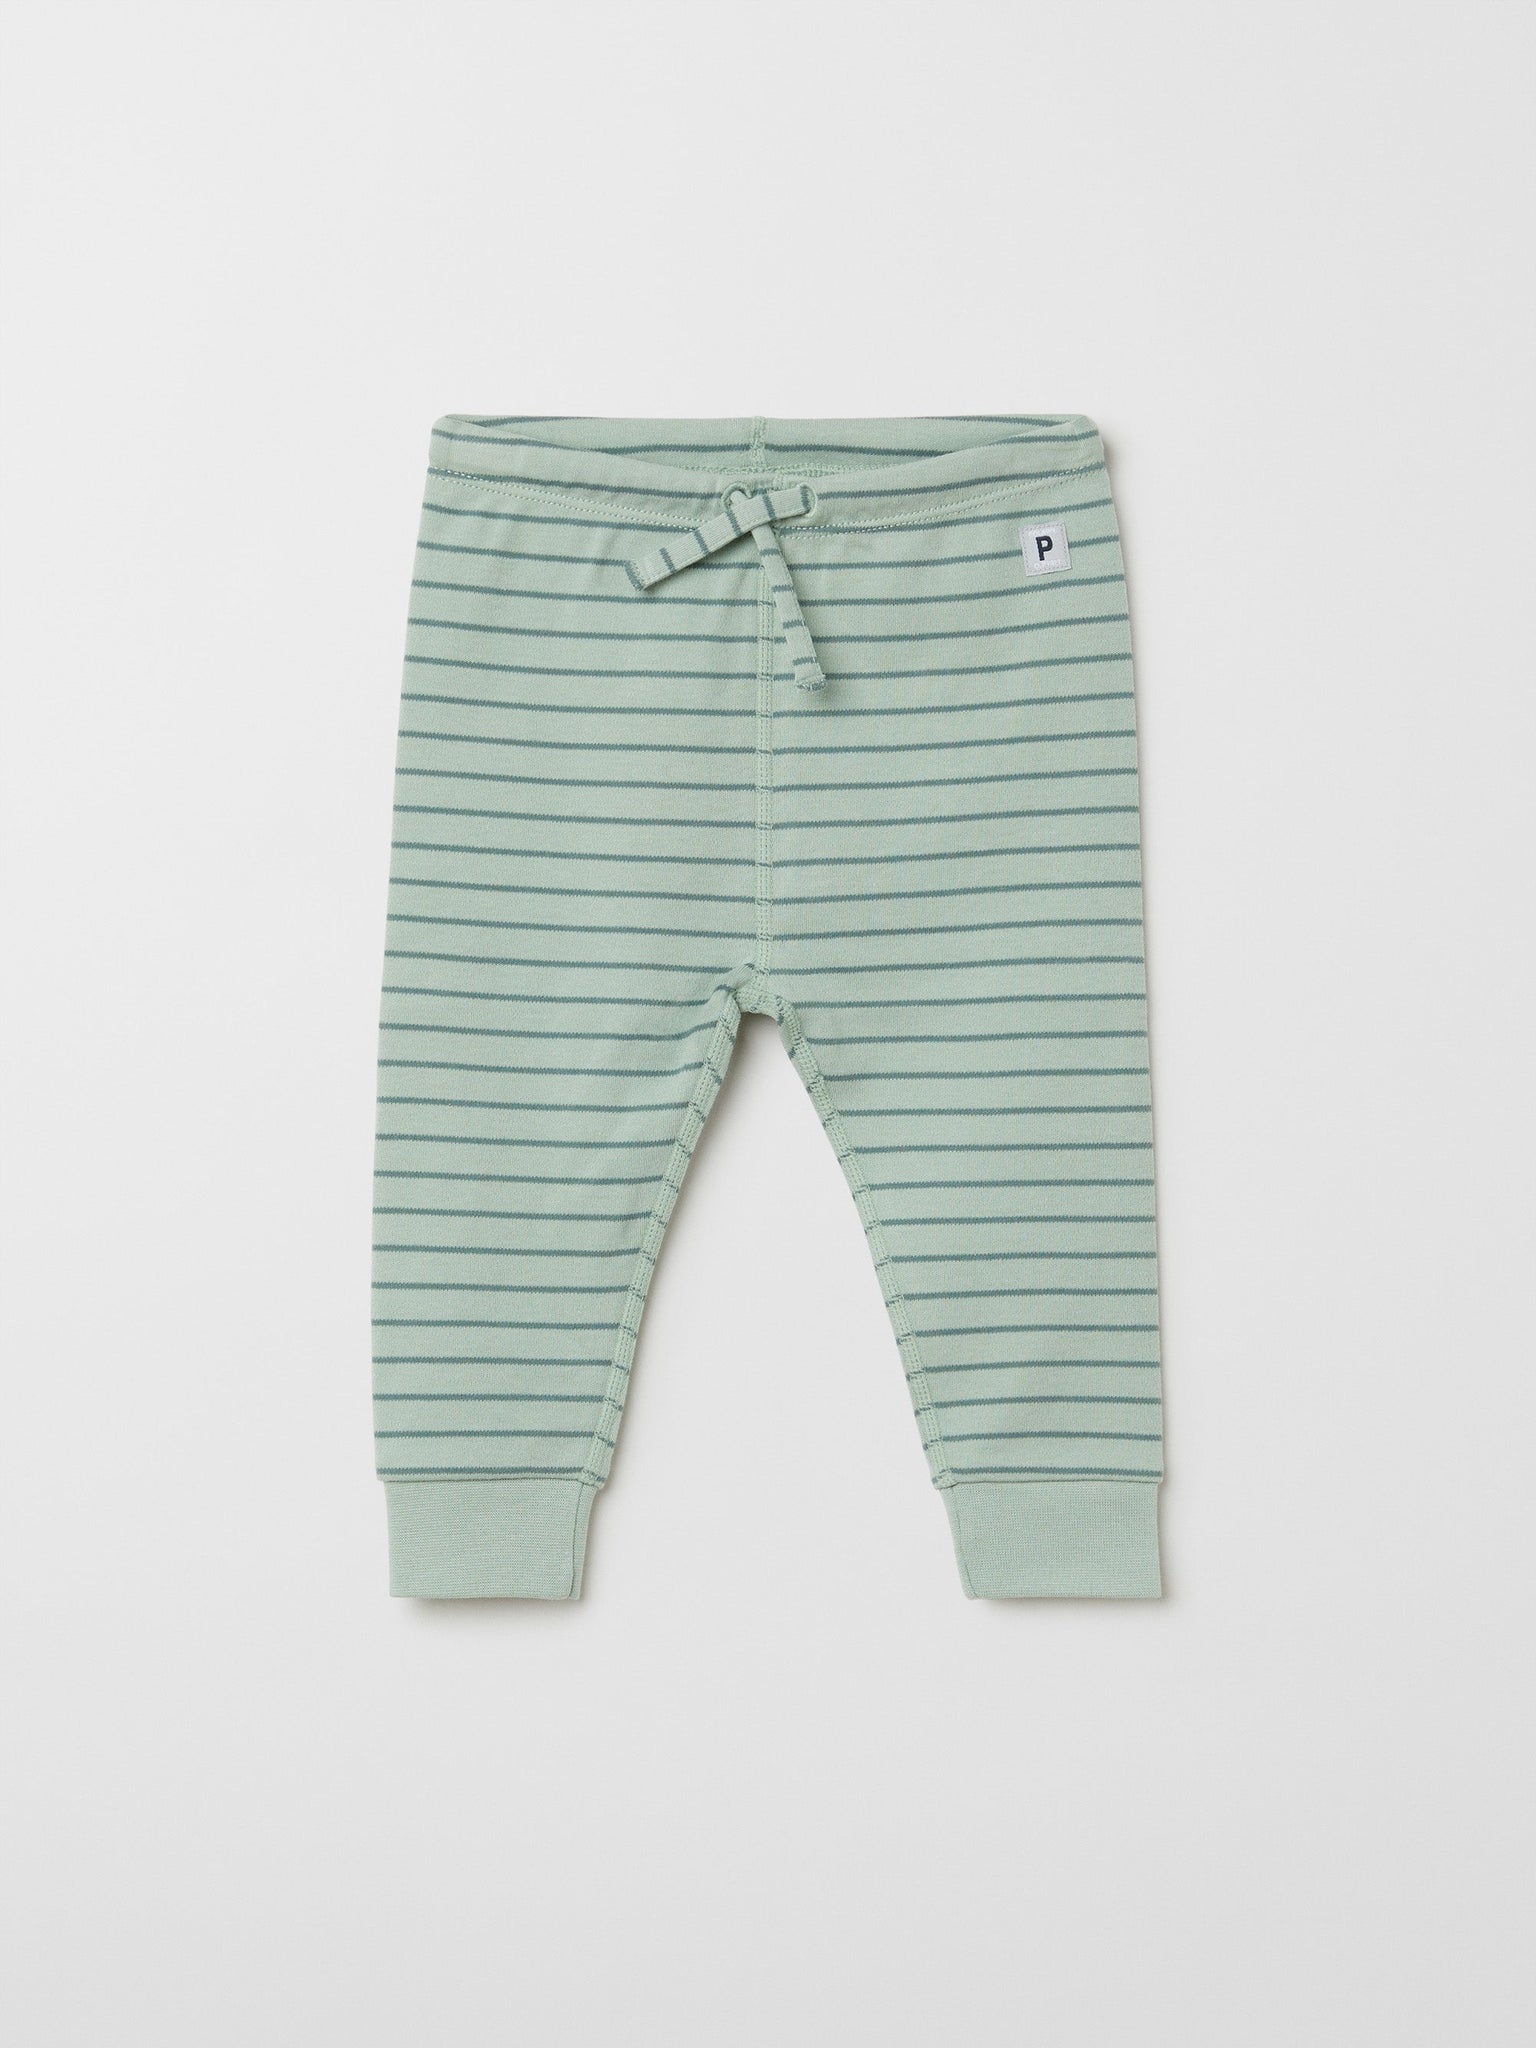 Organic Cotton Green Baby Leggings from the Polarn O. Pyret baby collection. The best ethical baby clothes